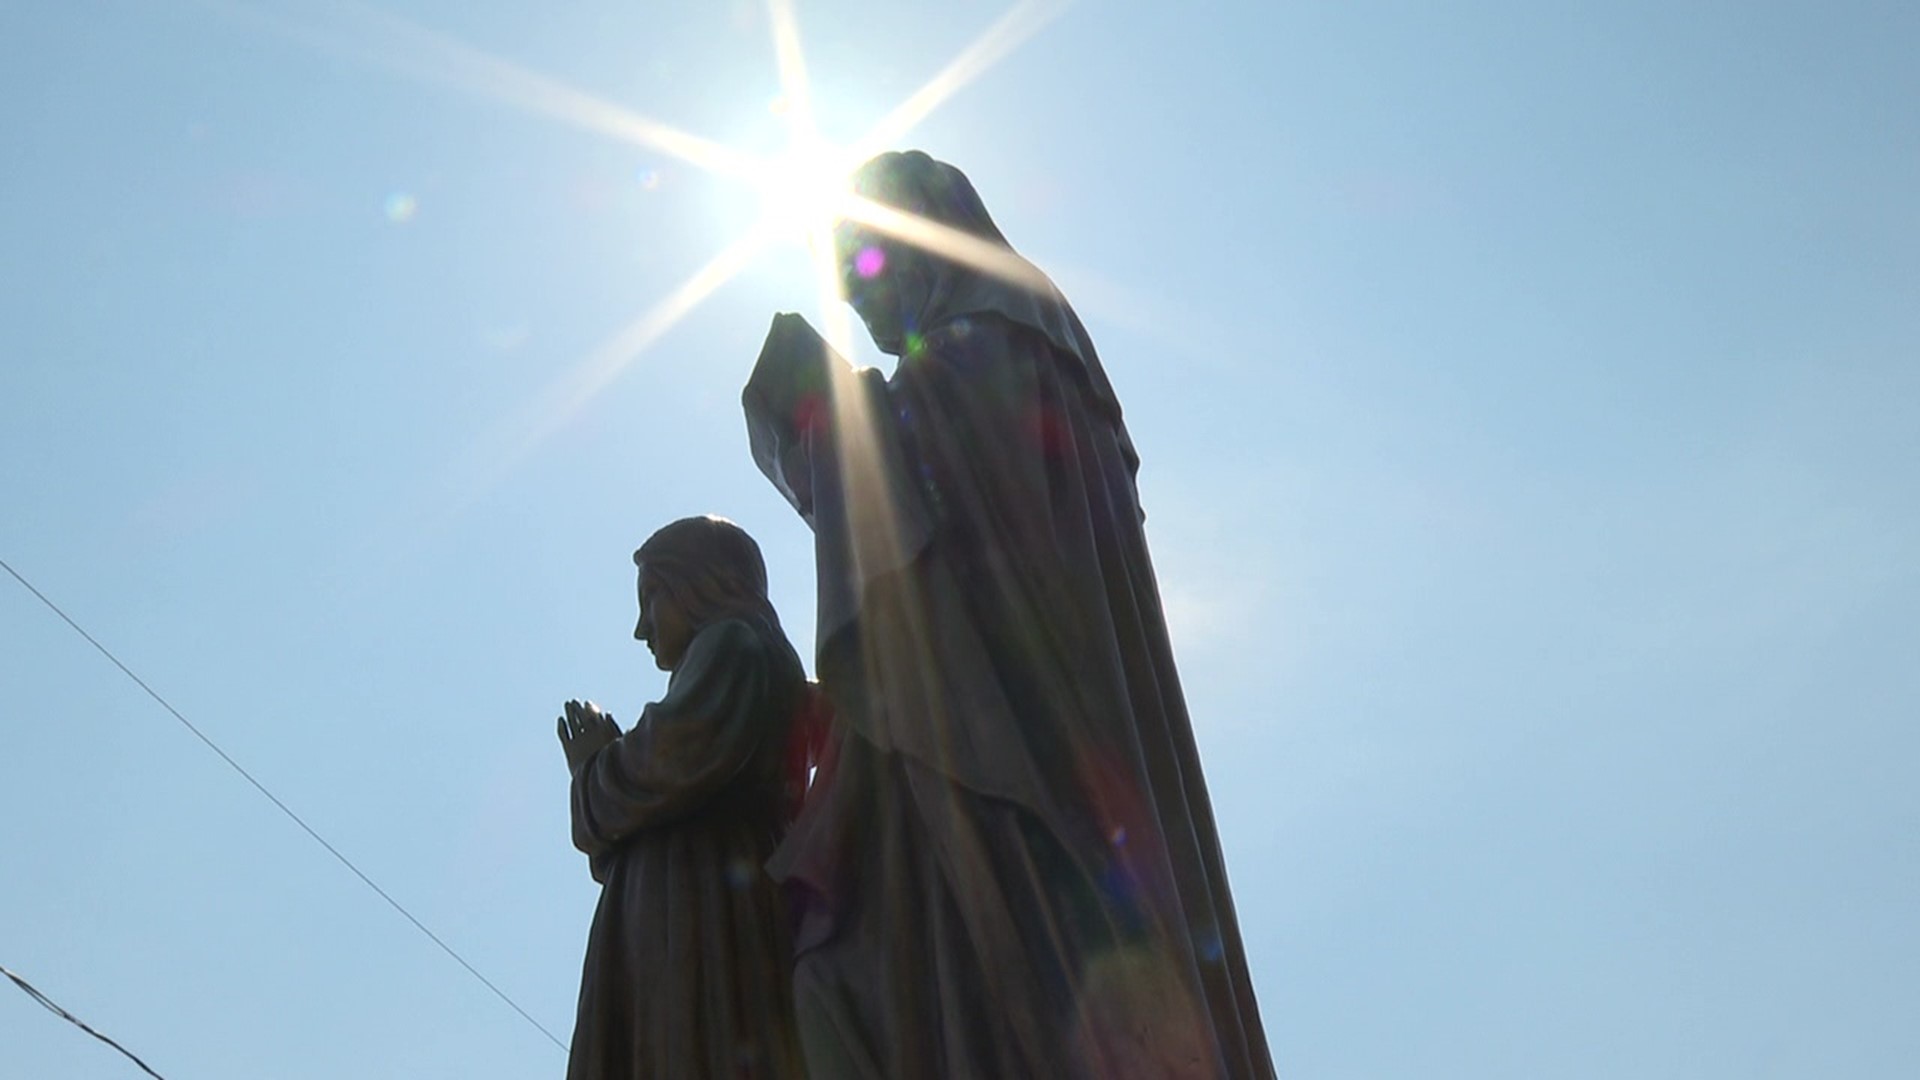 Hot summer weather and the annual novena in Scranton often go together.